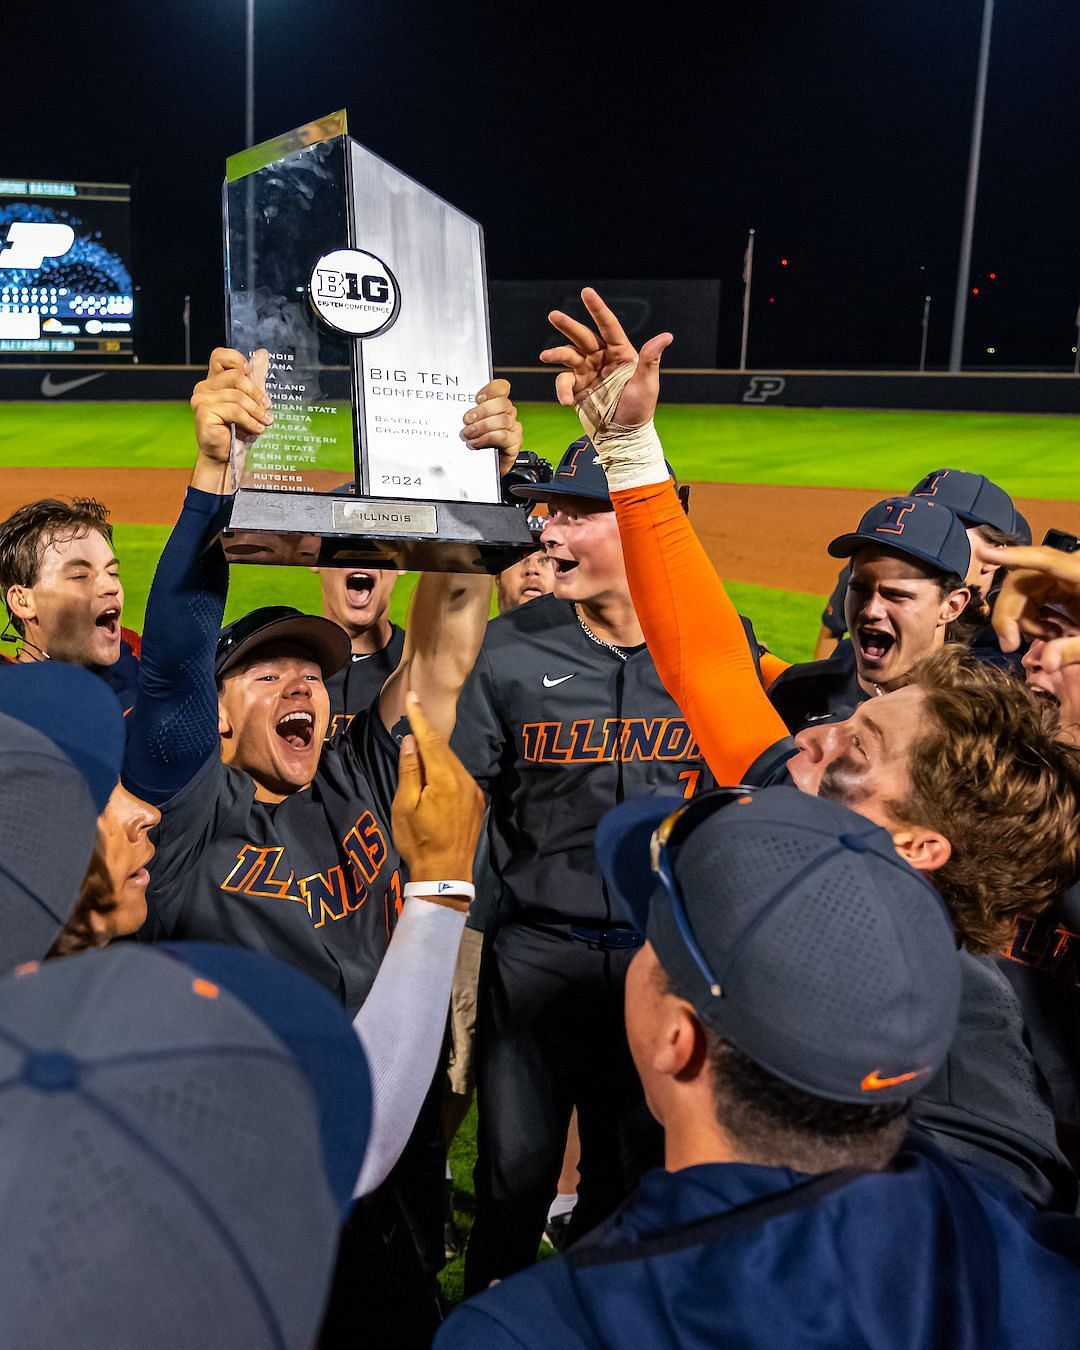 The Fighting Illini defeated Purdue 9-4 to secure their 31st Big Ten Regular Season title